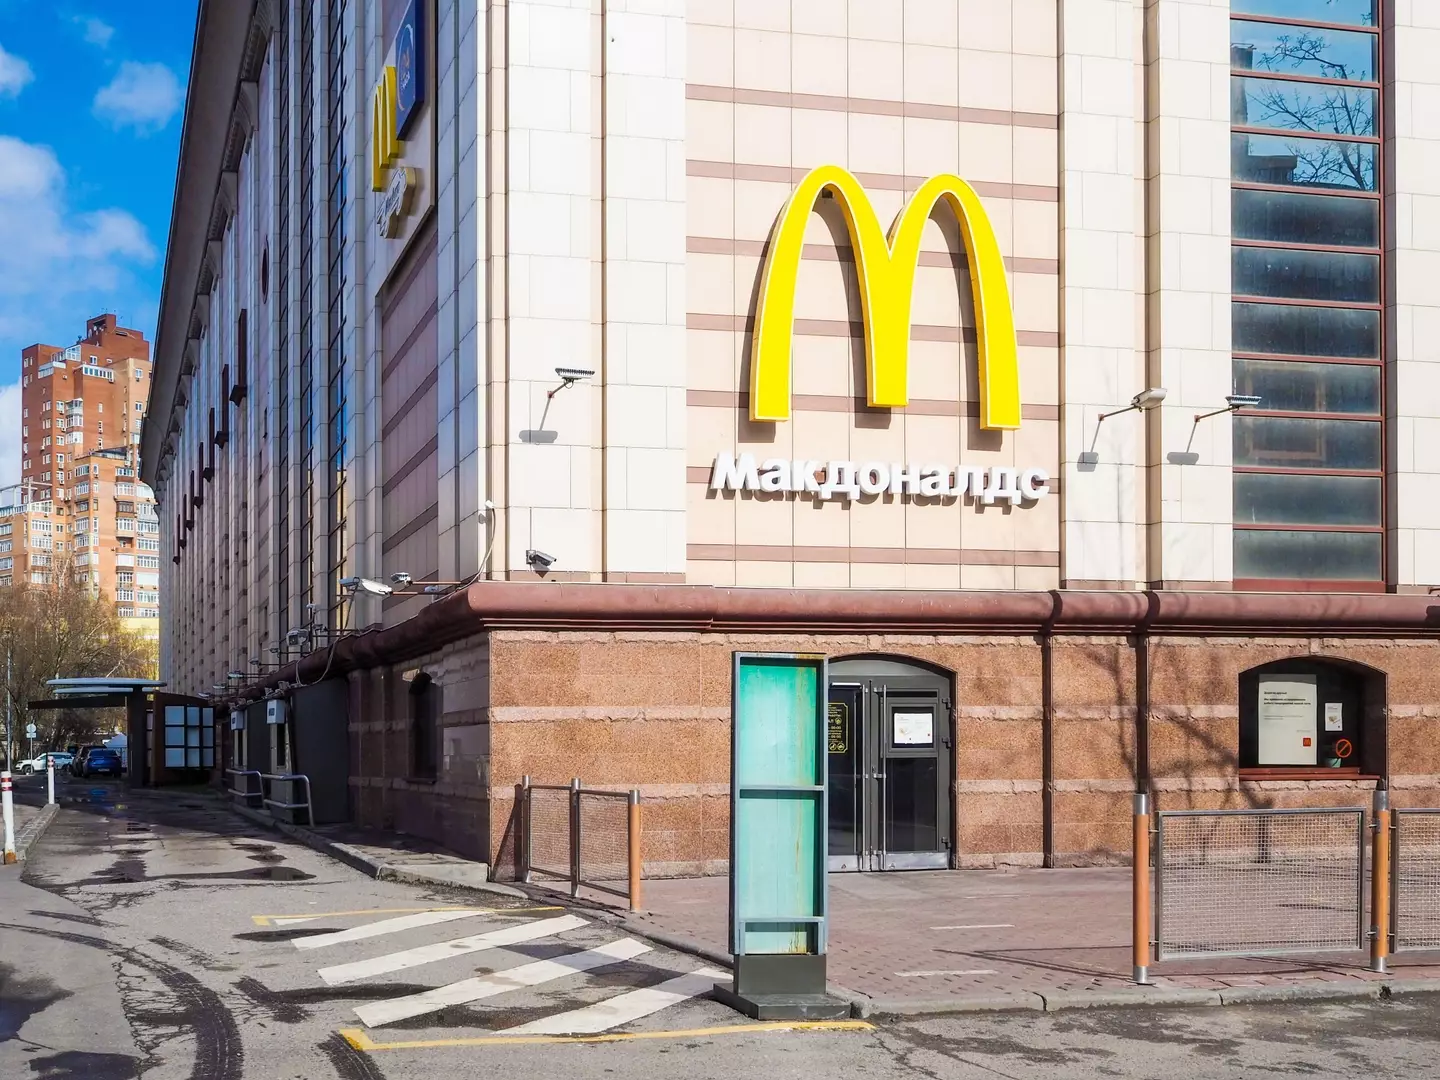 McDonald's revealed it was temporarily closing all of its restaurants in Russia last month.